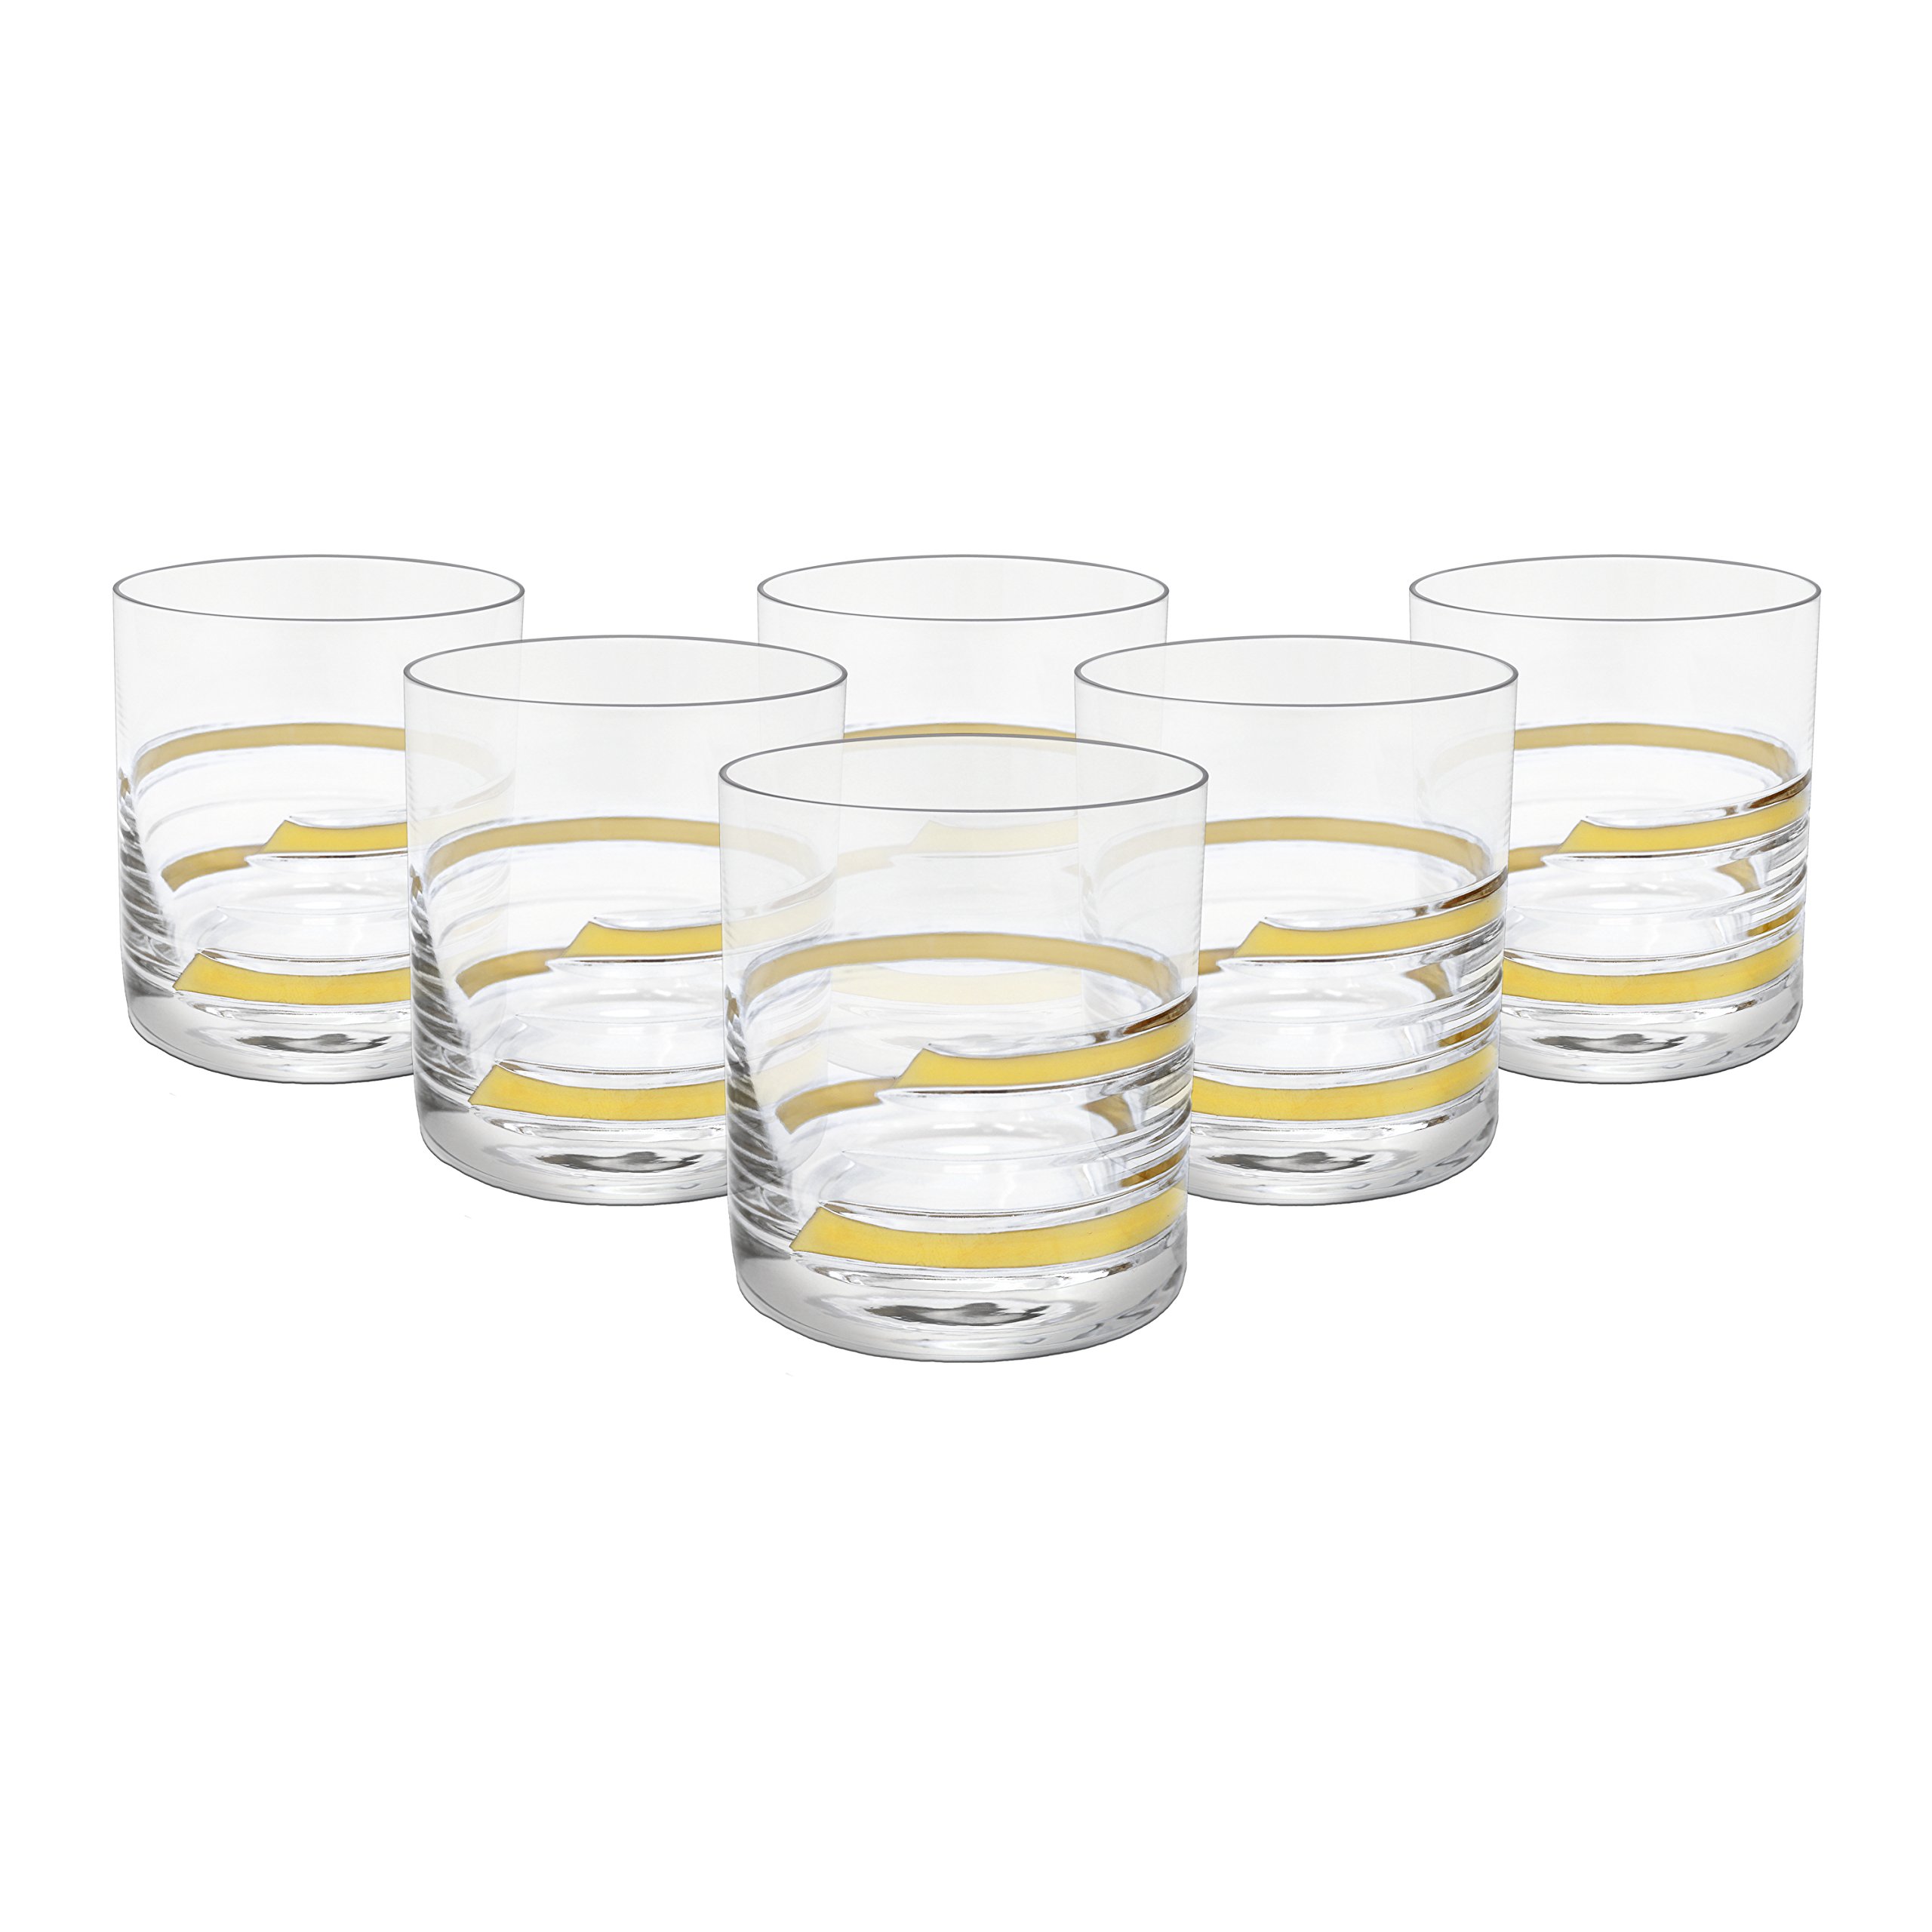 Glazze Crystal Set of 6 Handcrafted Old-Fashioned Whiskey Glasses with Real Gold Wide-Rimmed Detailing, Unique Luxurious Gift for Men and Women - For Whisky & More